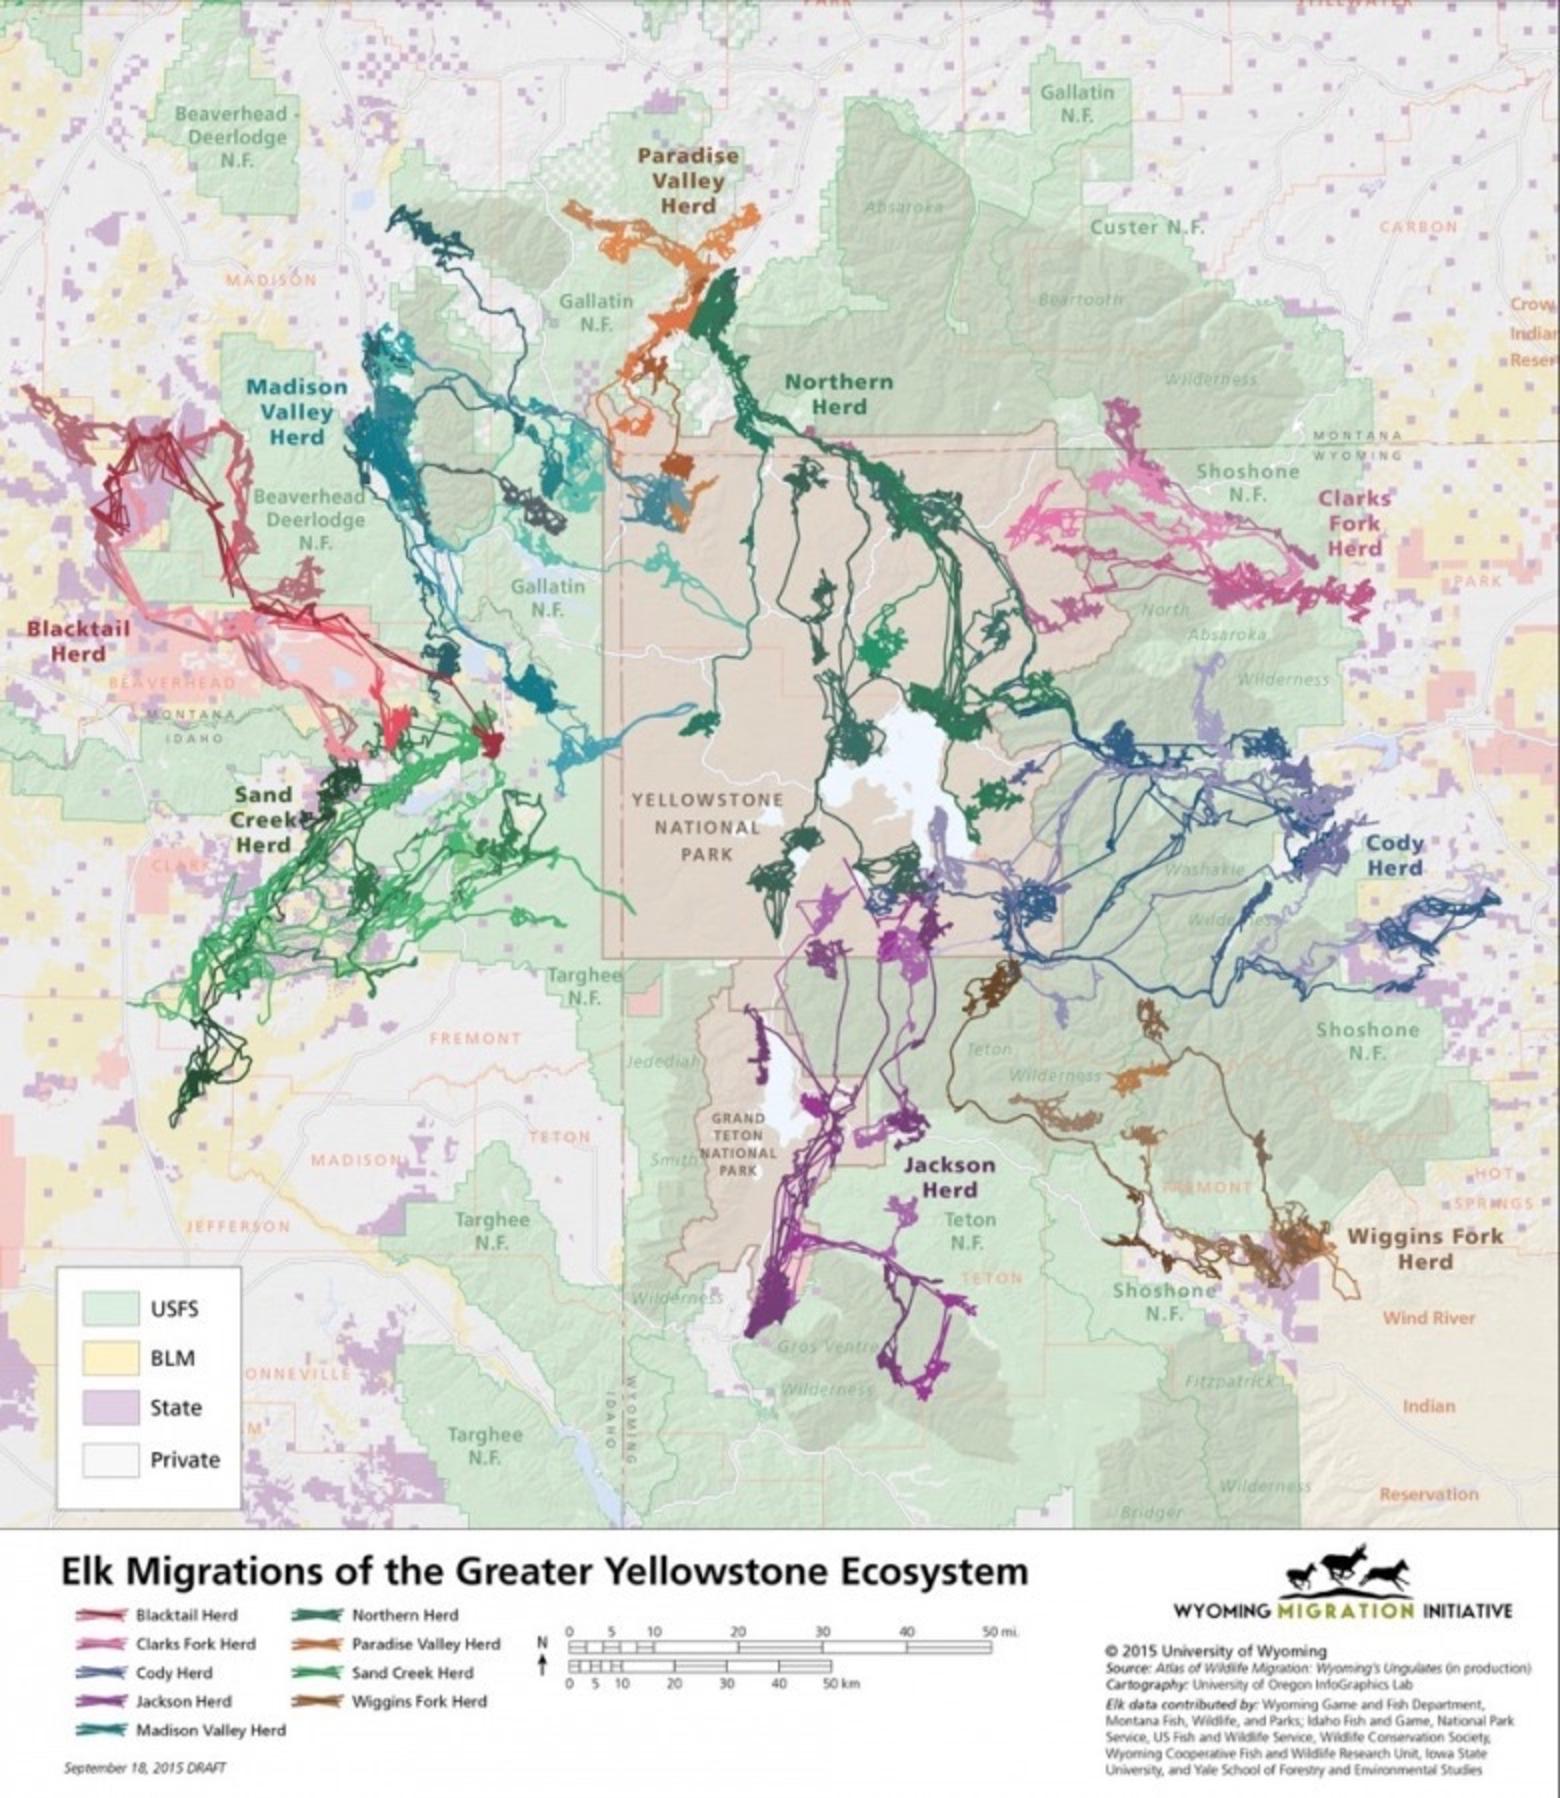 When the map documenting elk migrations in Greater Yellowstone was produced a few years ago by the Wyoming Migration Initiative, it made people realize the importance of landscapes unfragmented by development, across public and private lands, more than ever before. In the case of elk they move into Yellowstone National Park in spring and summer and then out to winter range, like lungs breathing in and exhaling. Similar maps could exist for lots of species, illustrating why Greater Yellowstone is compared to the Serengeti.  But until the science is incorporated into planning efforts by cities and counties in Greater Yellowstone, the gauntlets of wildlife corridors will become only more perilous for the animals using them. Eventually, they can stop functioning.  